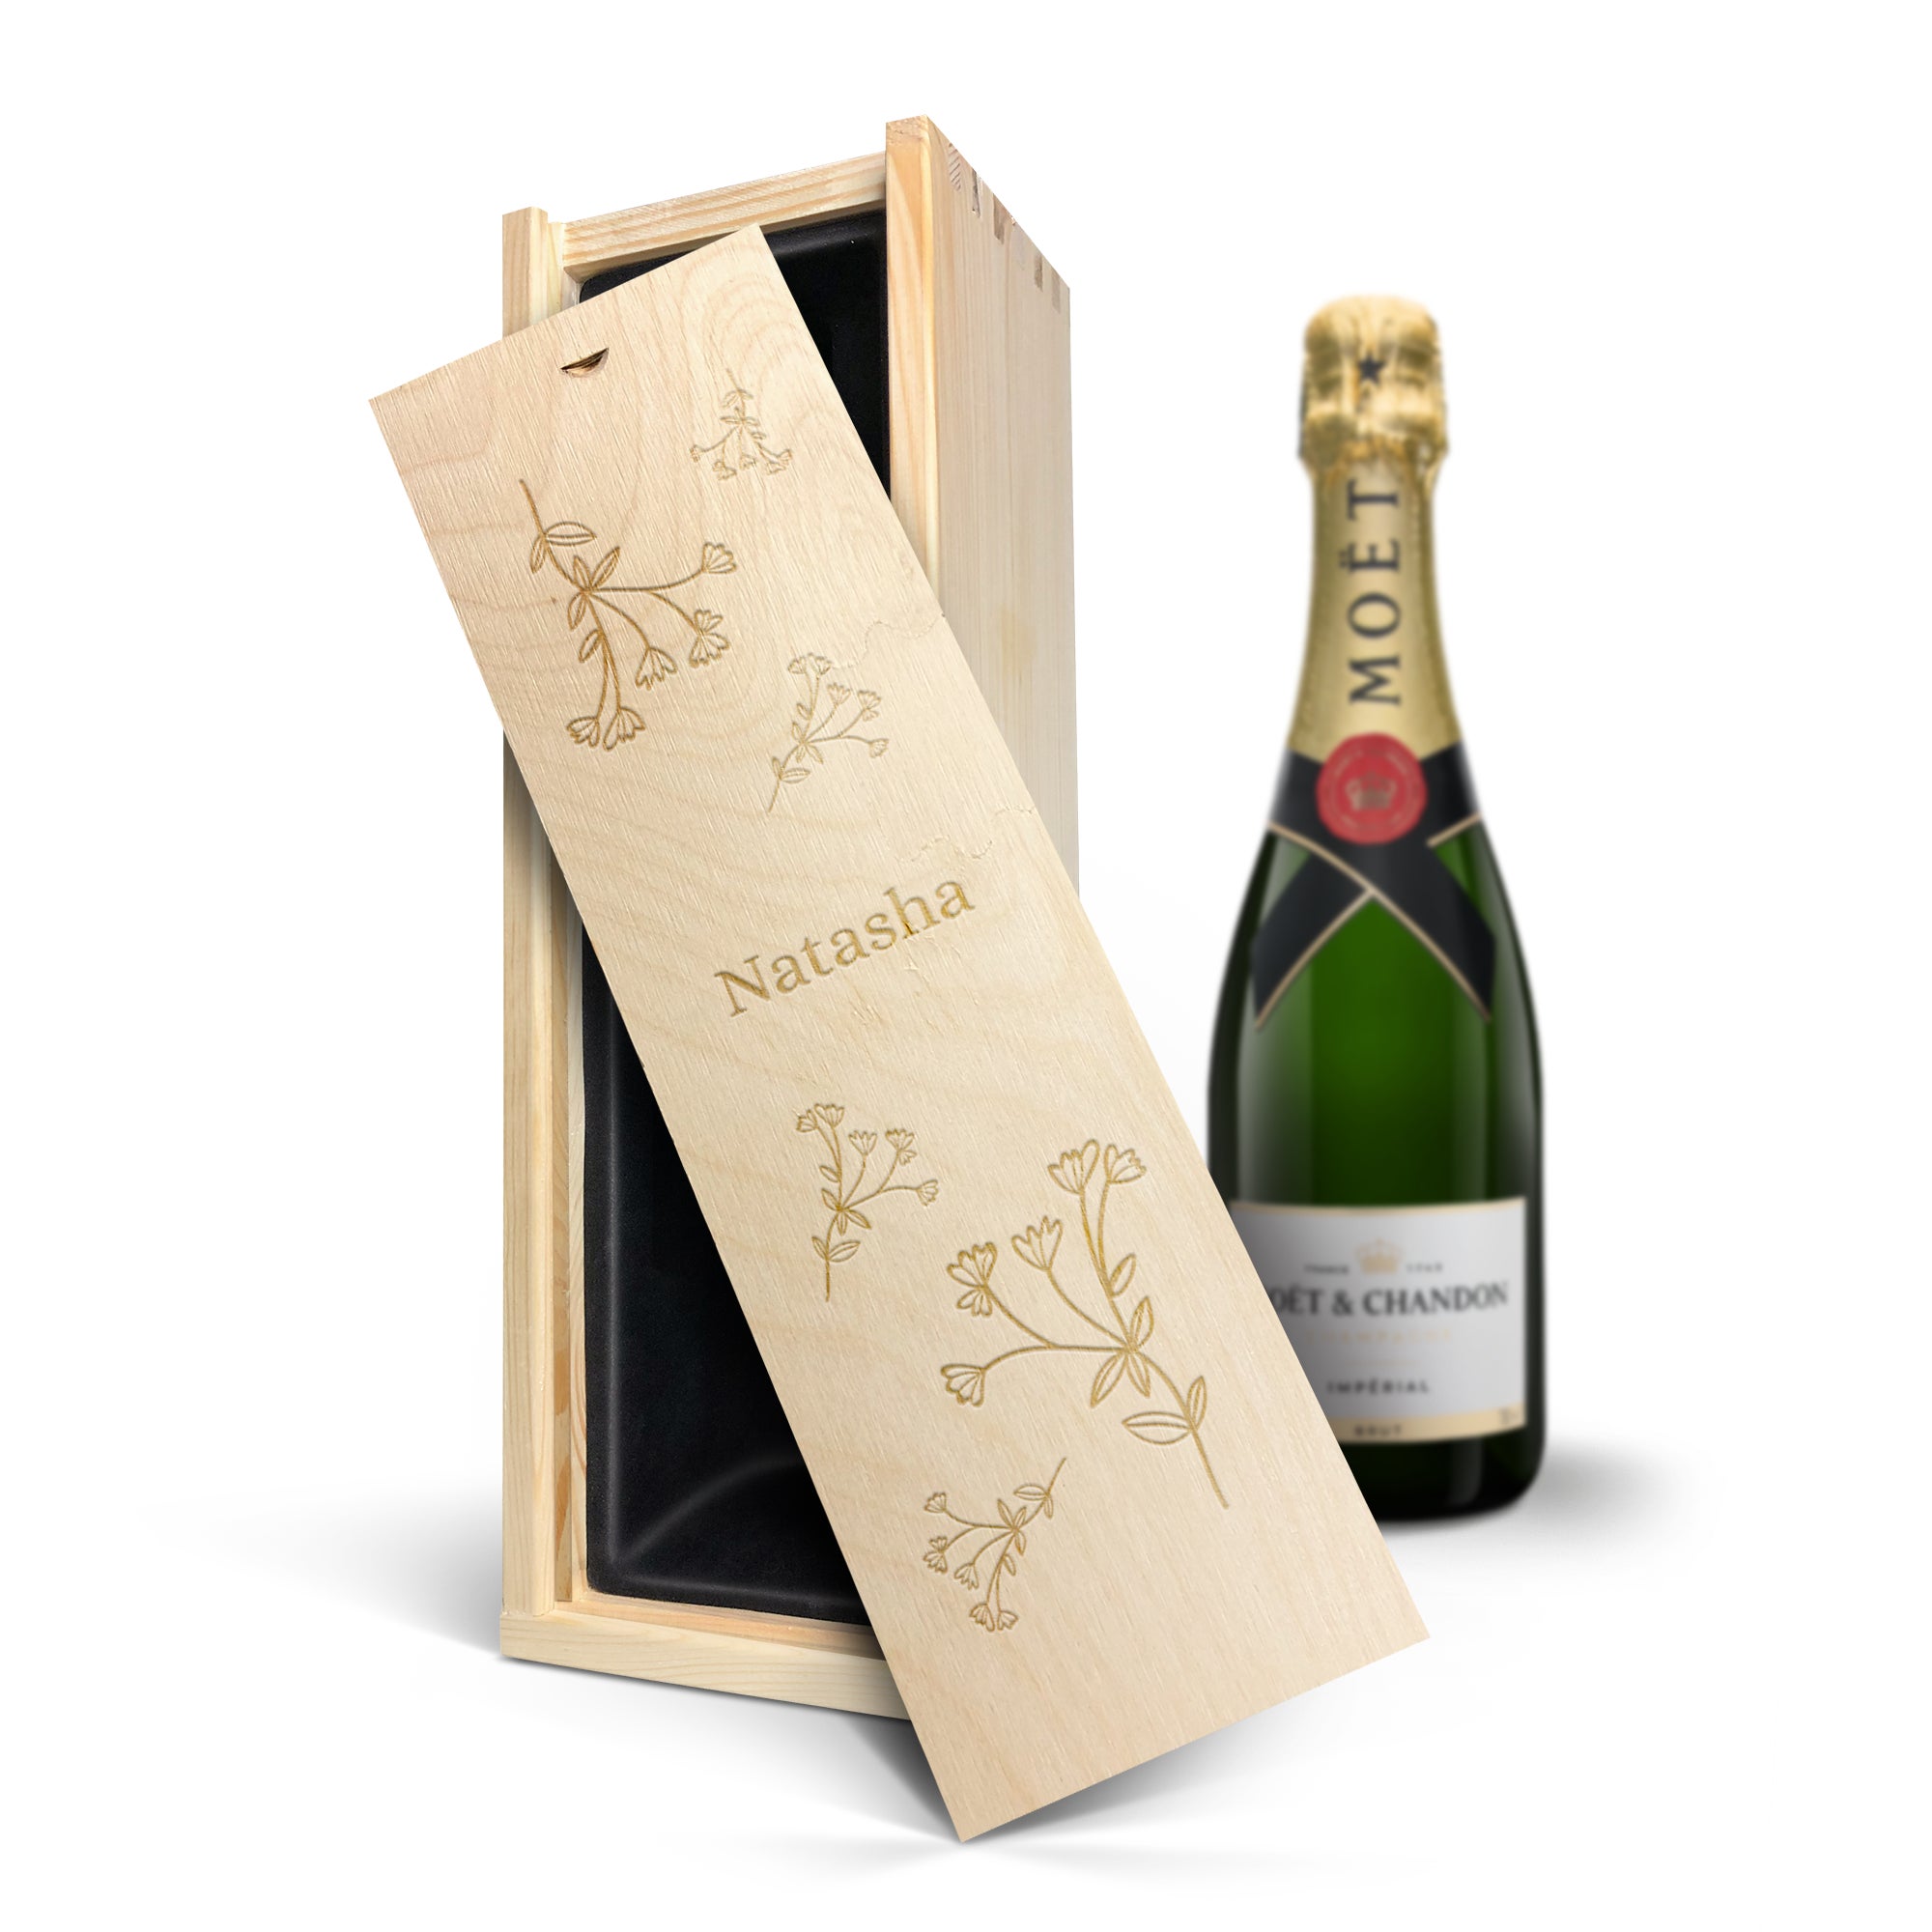 Personalised champagne gift - Moet & Chandon (750 ml) - Engraved wooden case